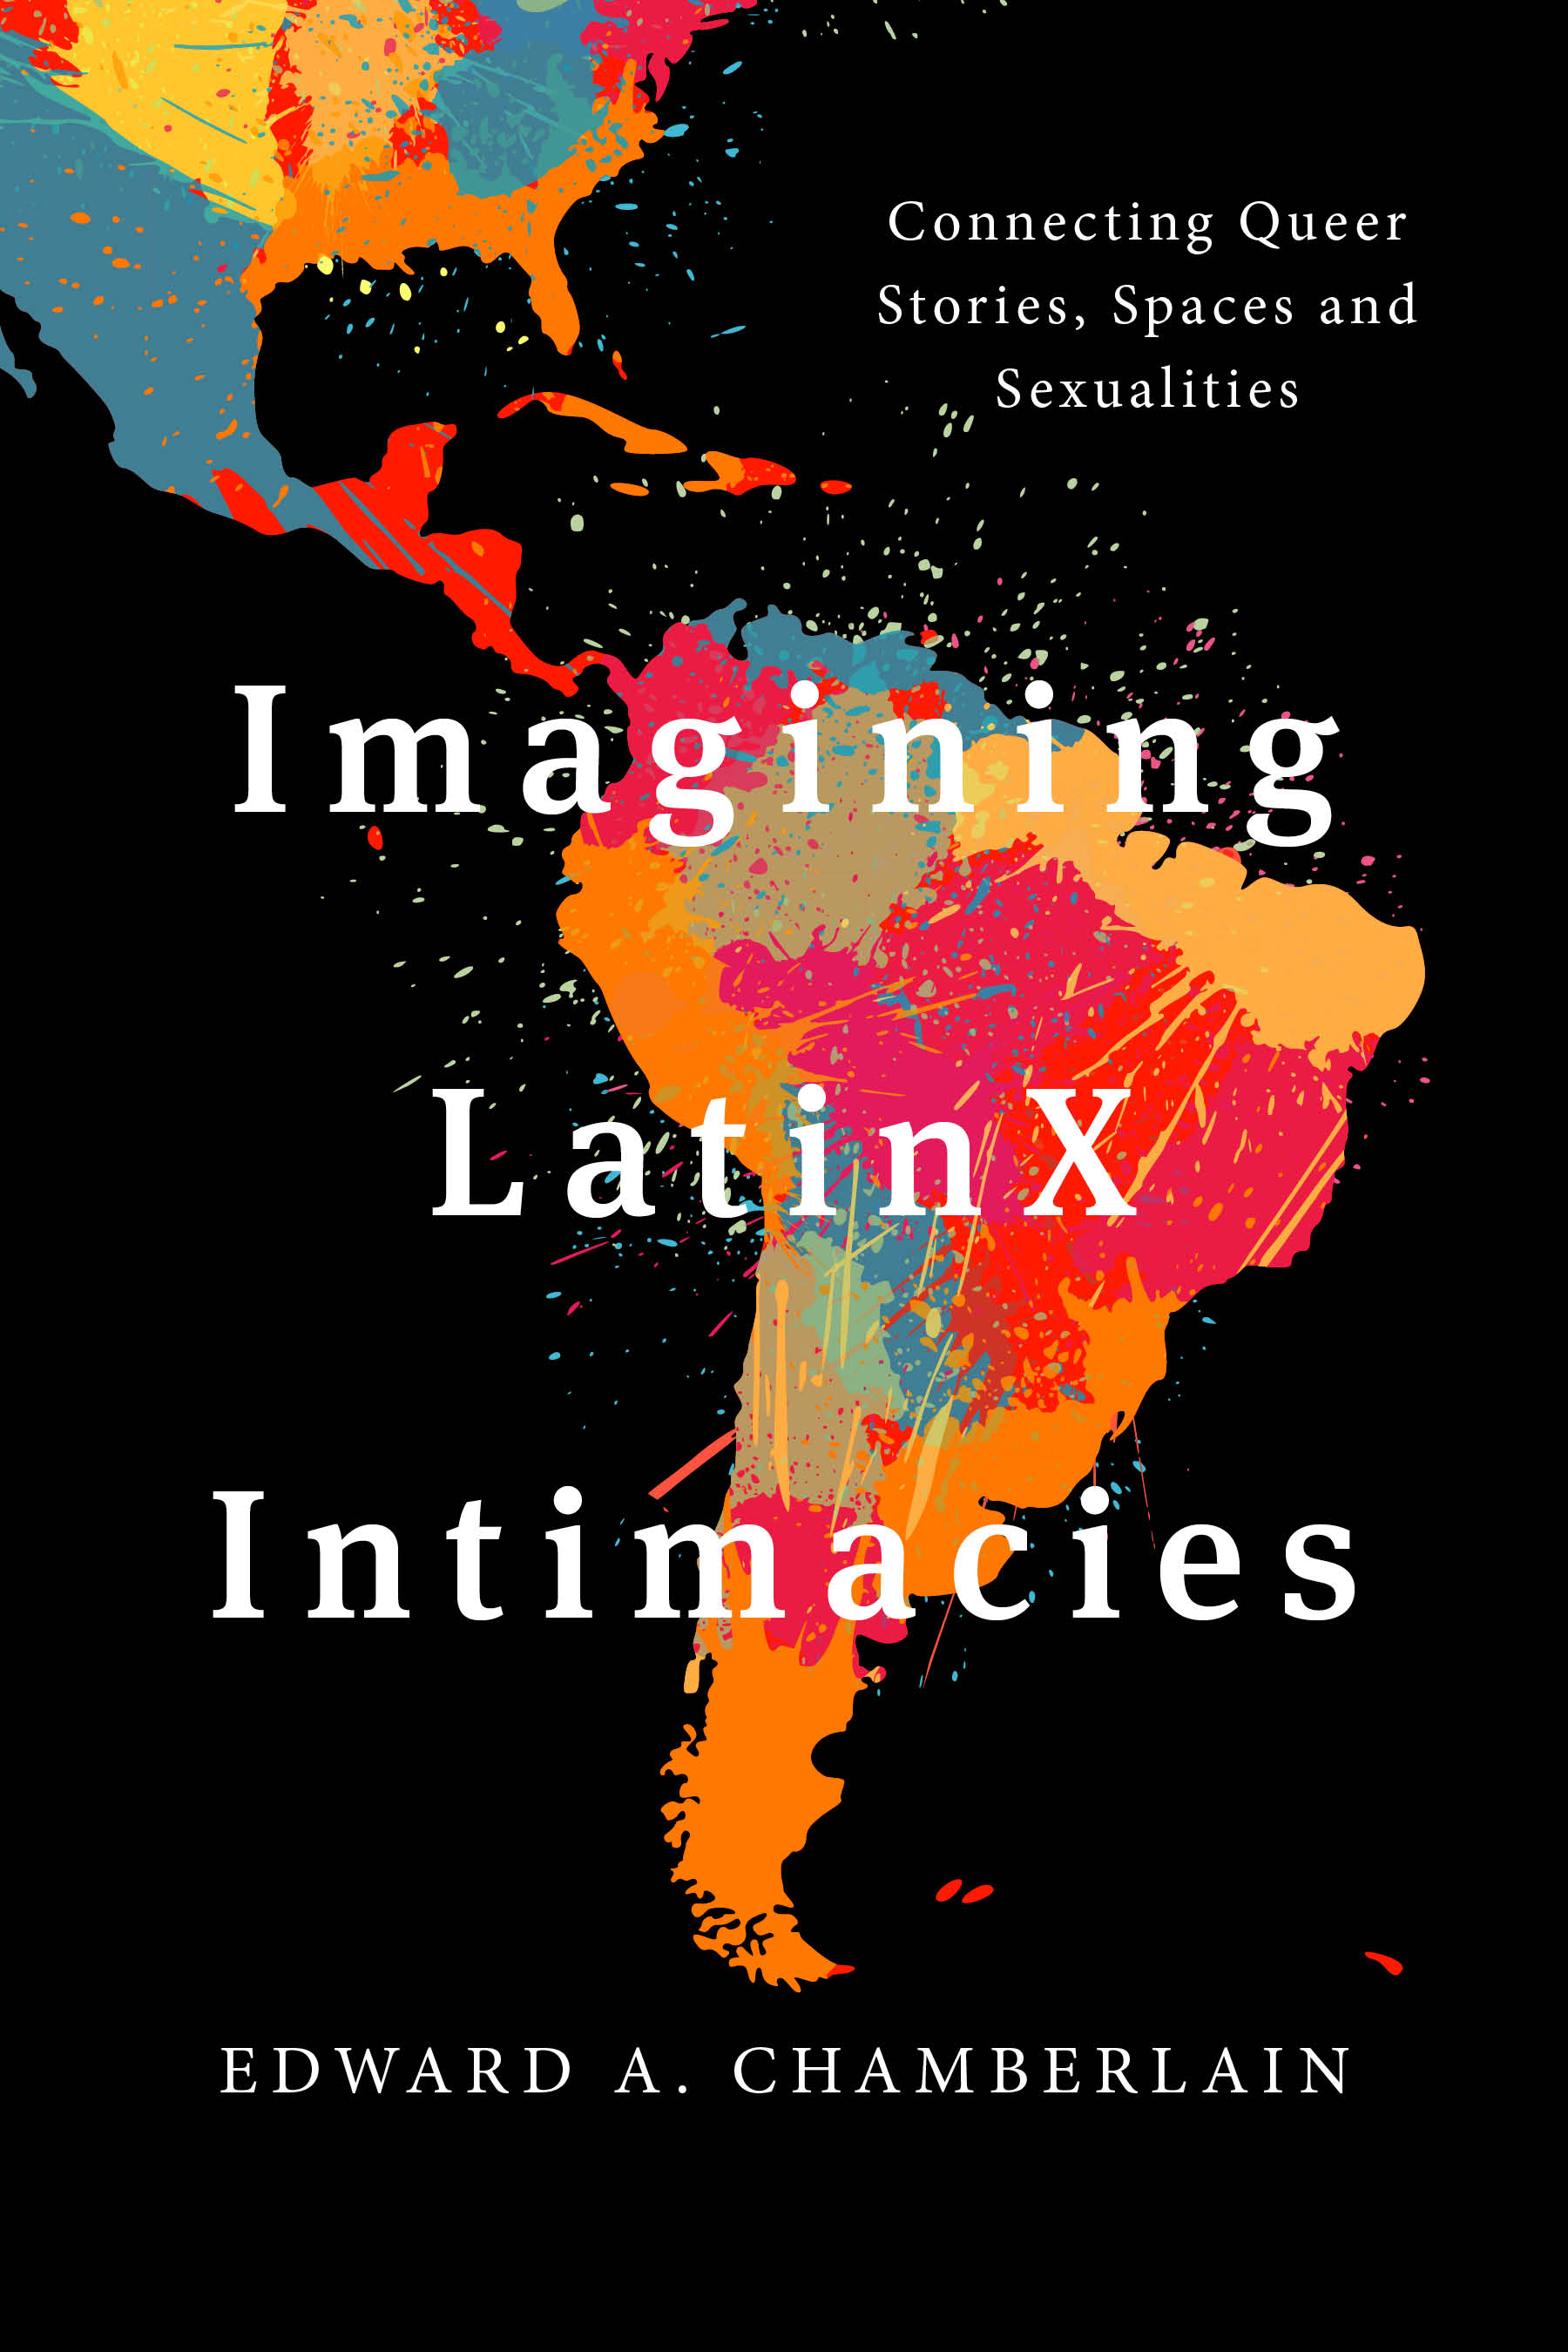 Imagining LatinX Intimacies: Connecting Queer Stories, Spaces and Sexualities